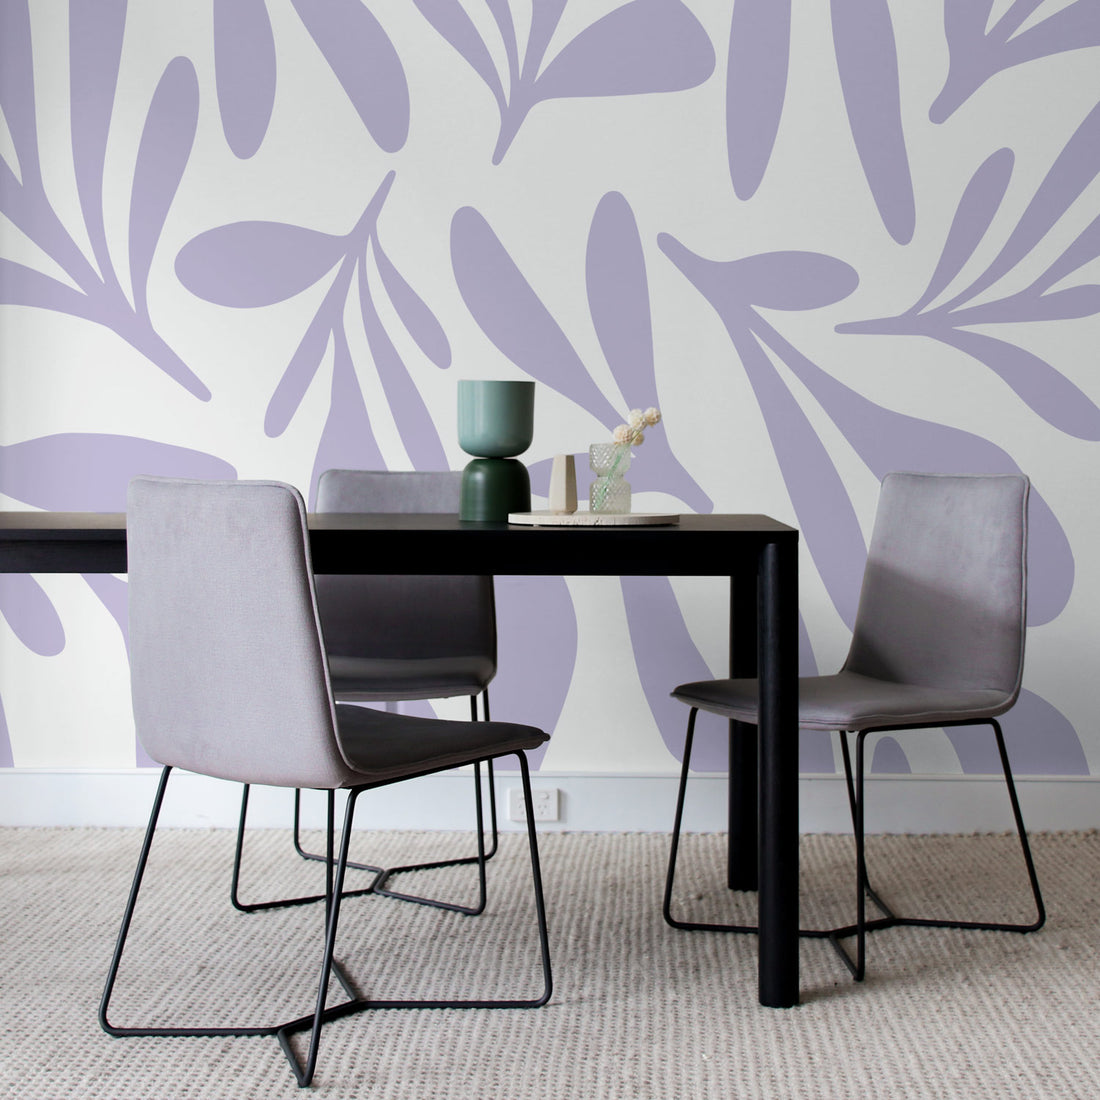 large lilac flowers wall mural design for dining room interior